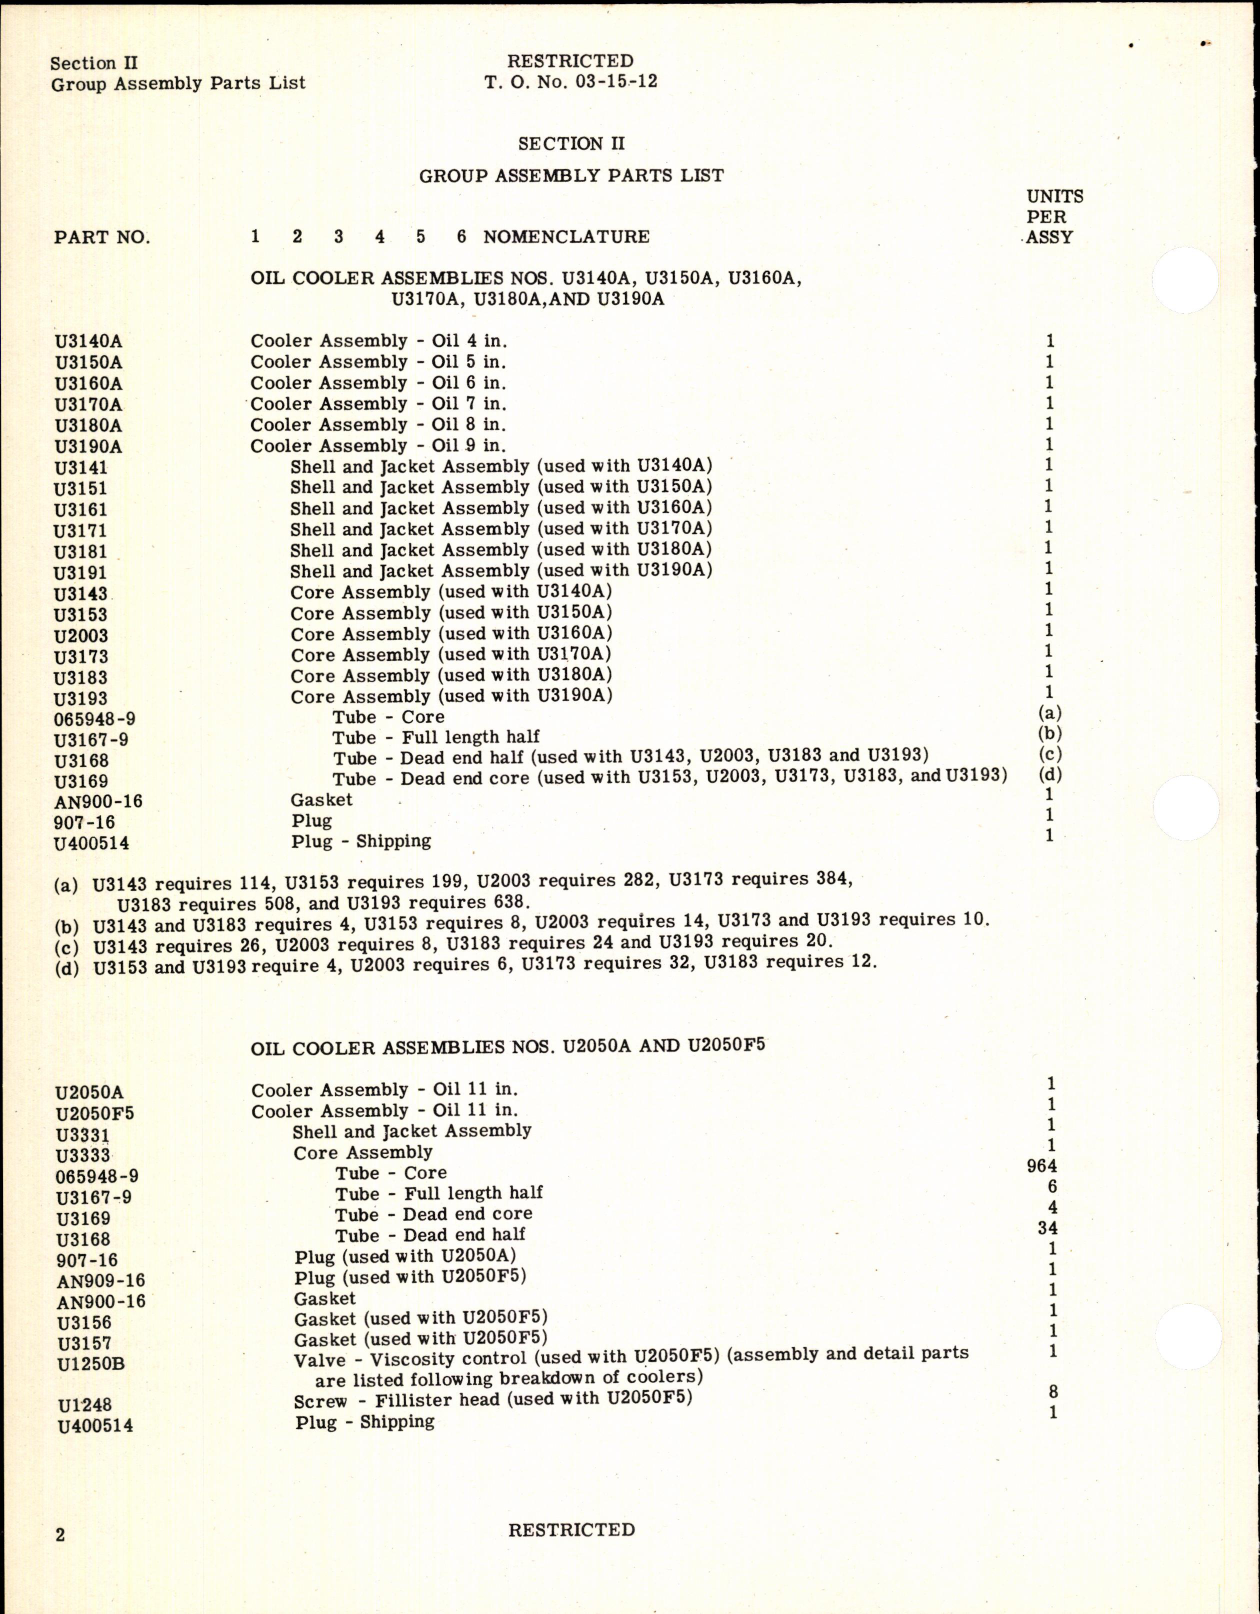 Sample page 4 from AirCorps Library document: Parts Catalog for Oil Cooler and Control Valves